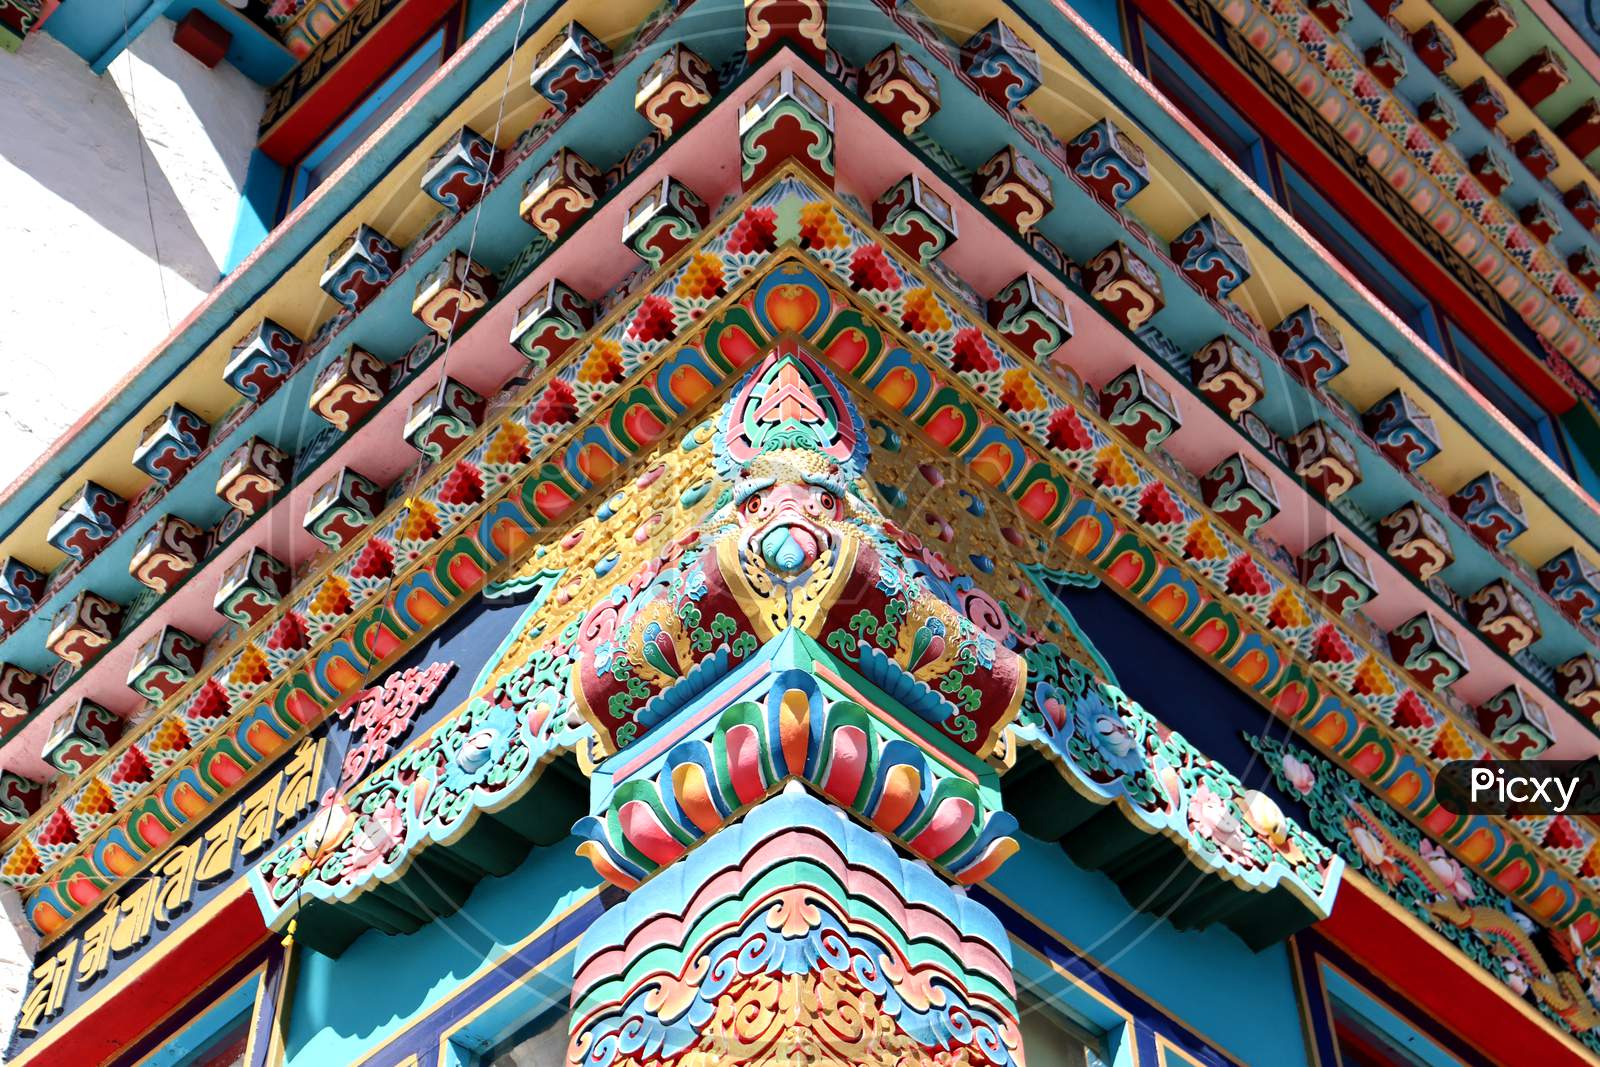 Colourful Design On A Wall Of A Monastery In Tawang Arunachal Prodesh,India,Art Work Of A Monastery,Buddha Culture